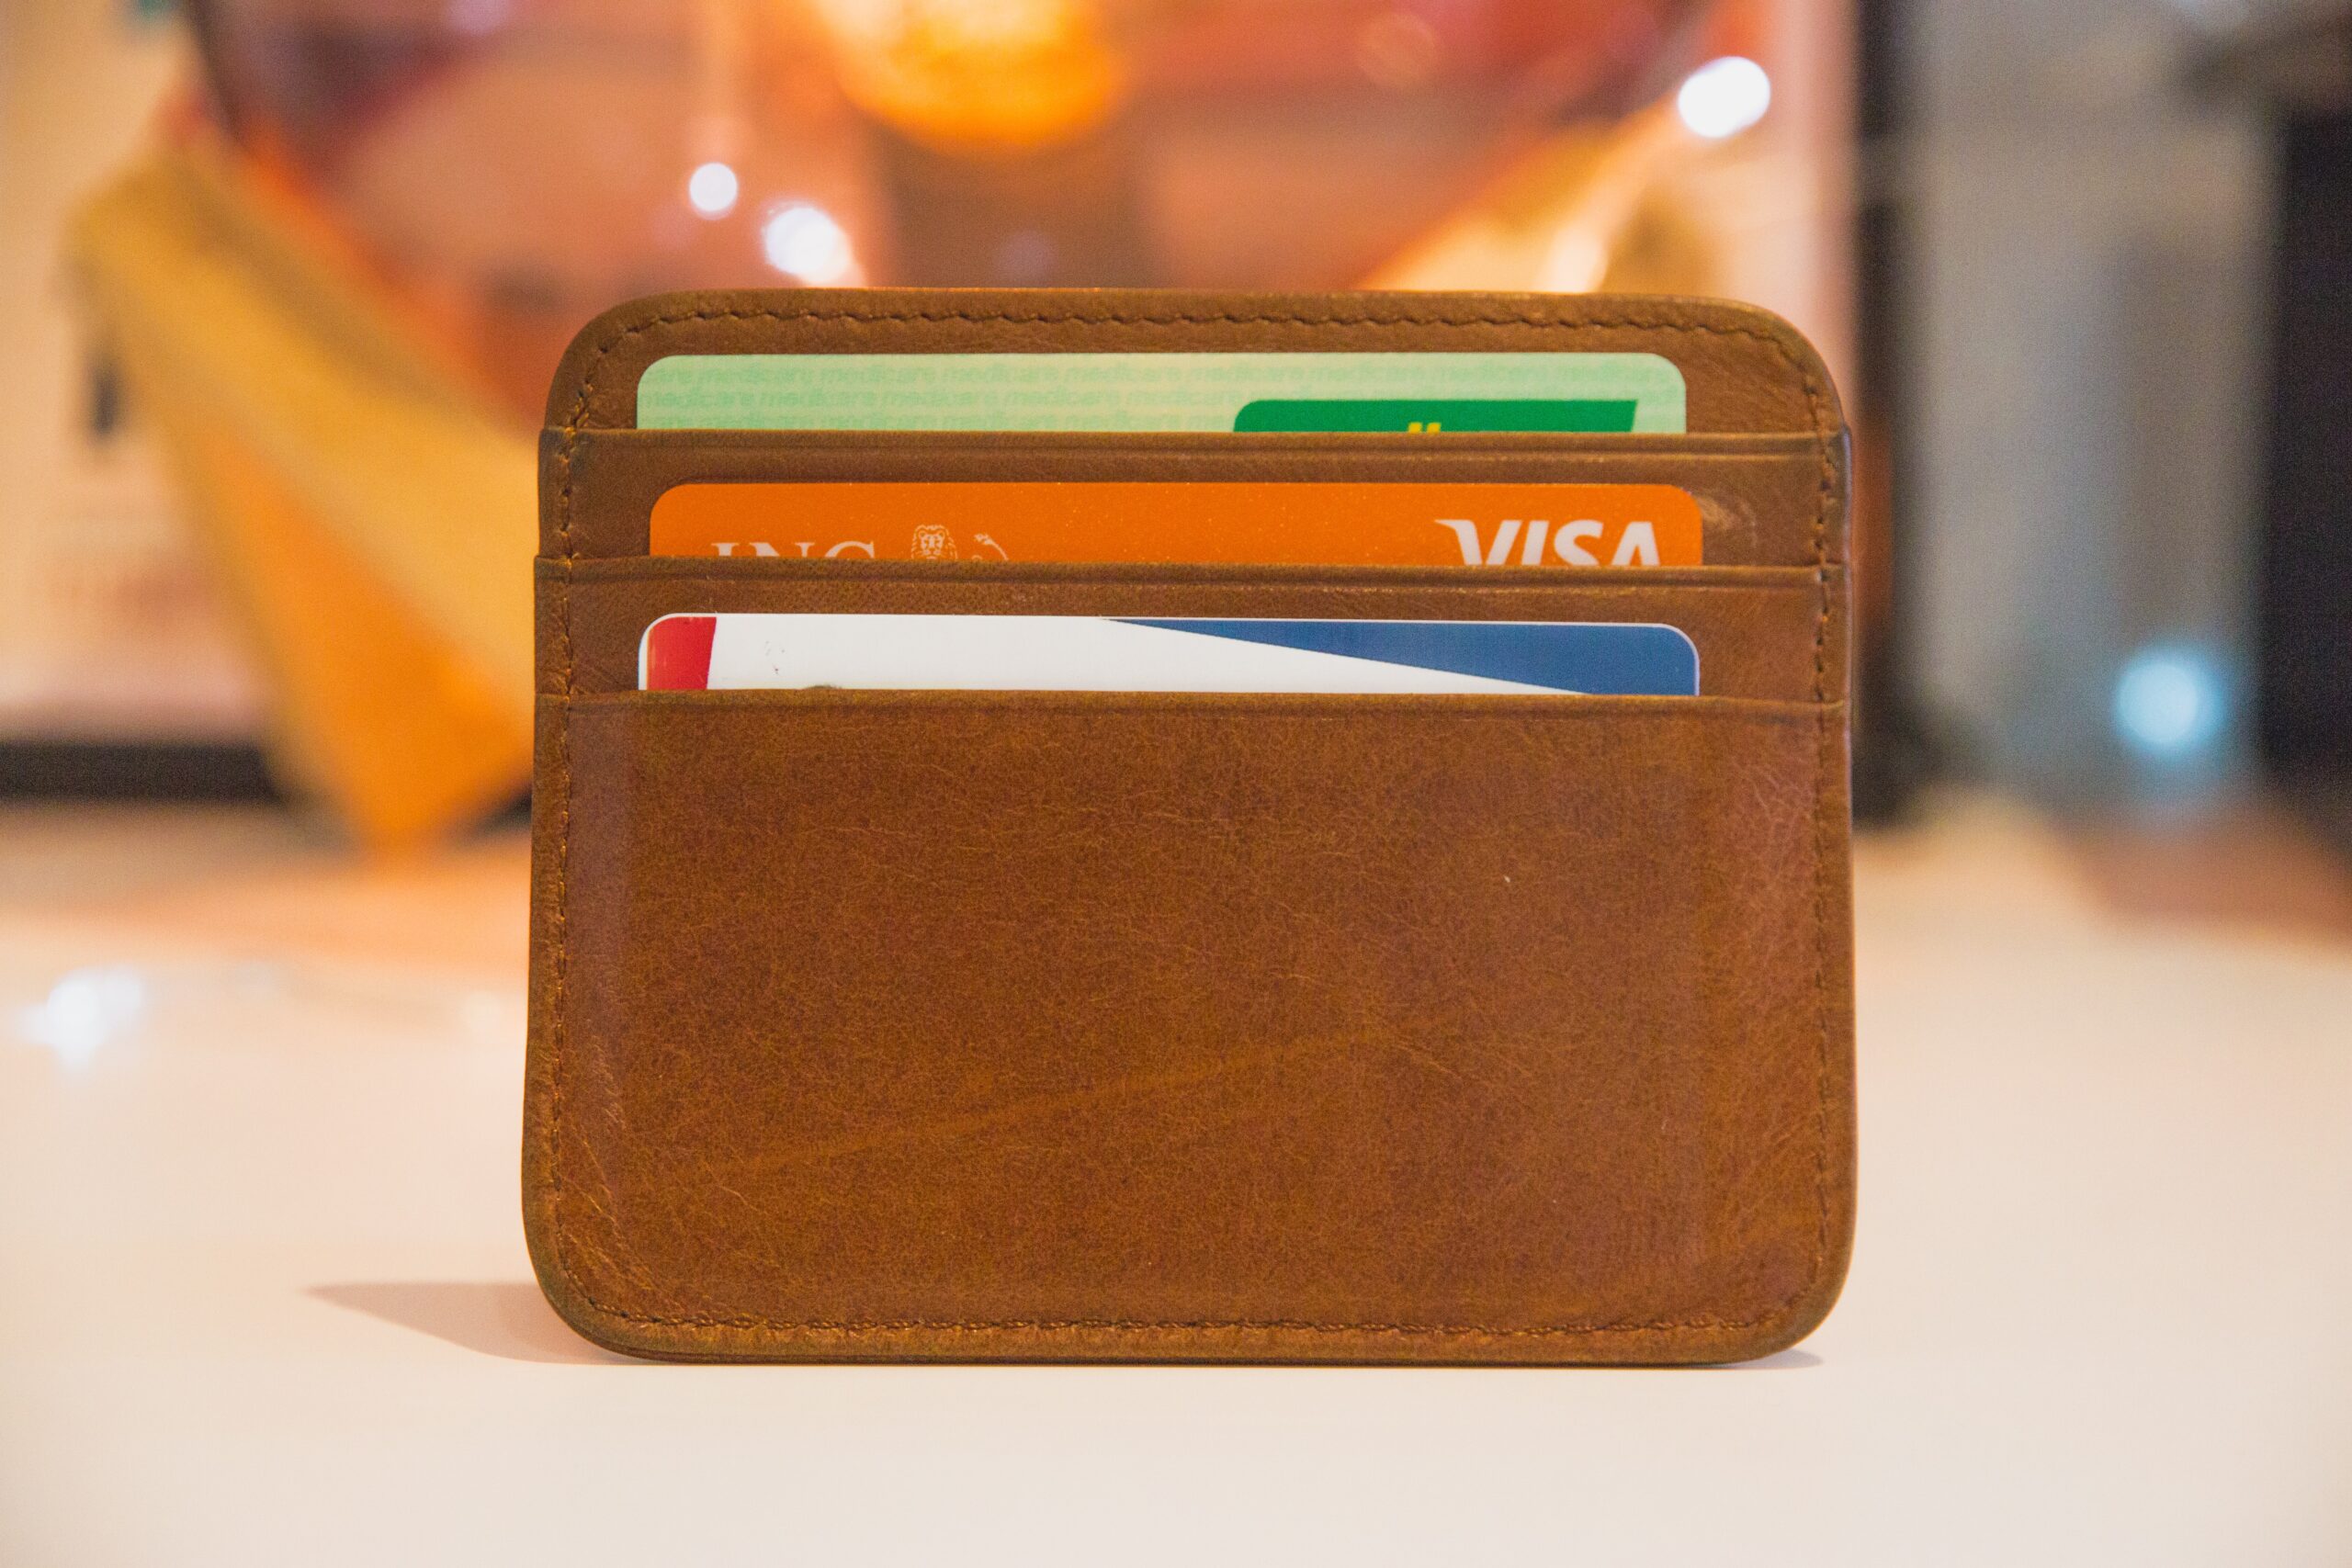 WHAT SHOULD BE IN A MEN CREDIT CARD HOLDER?